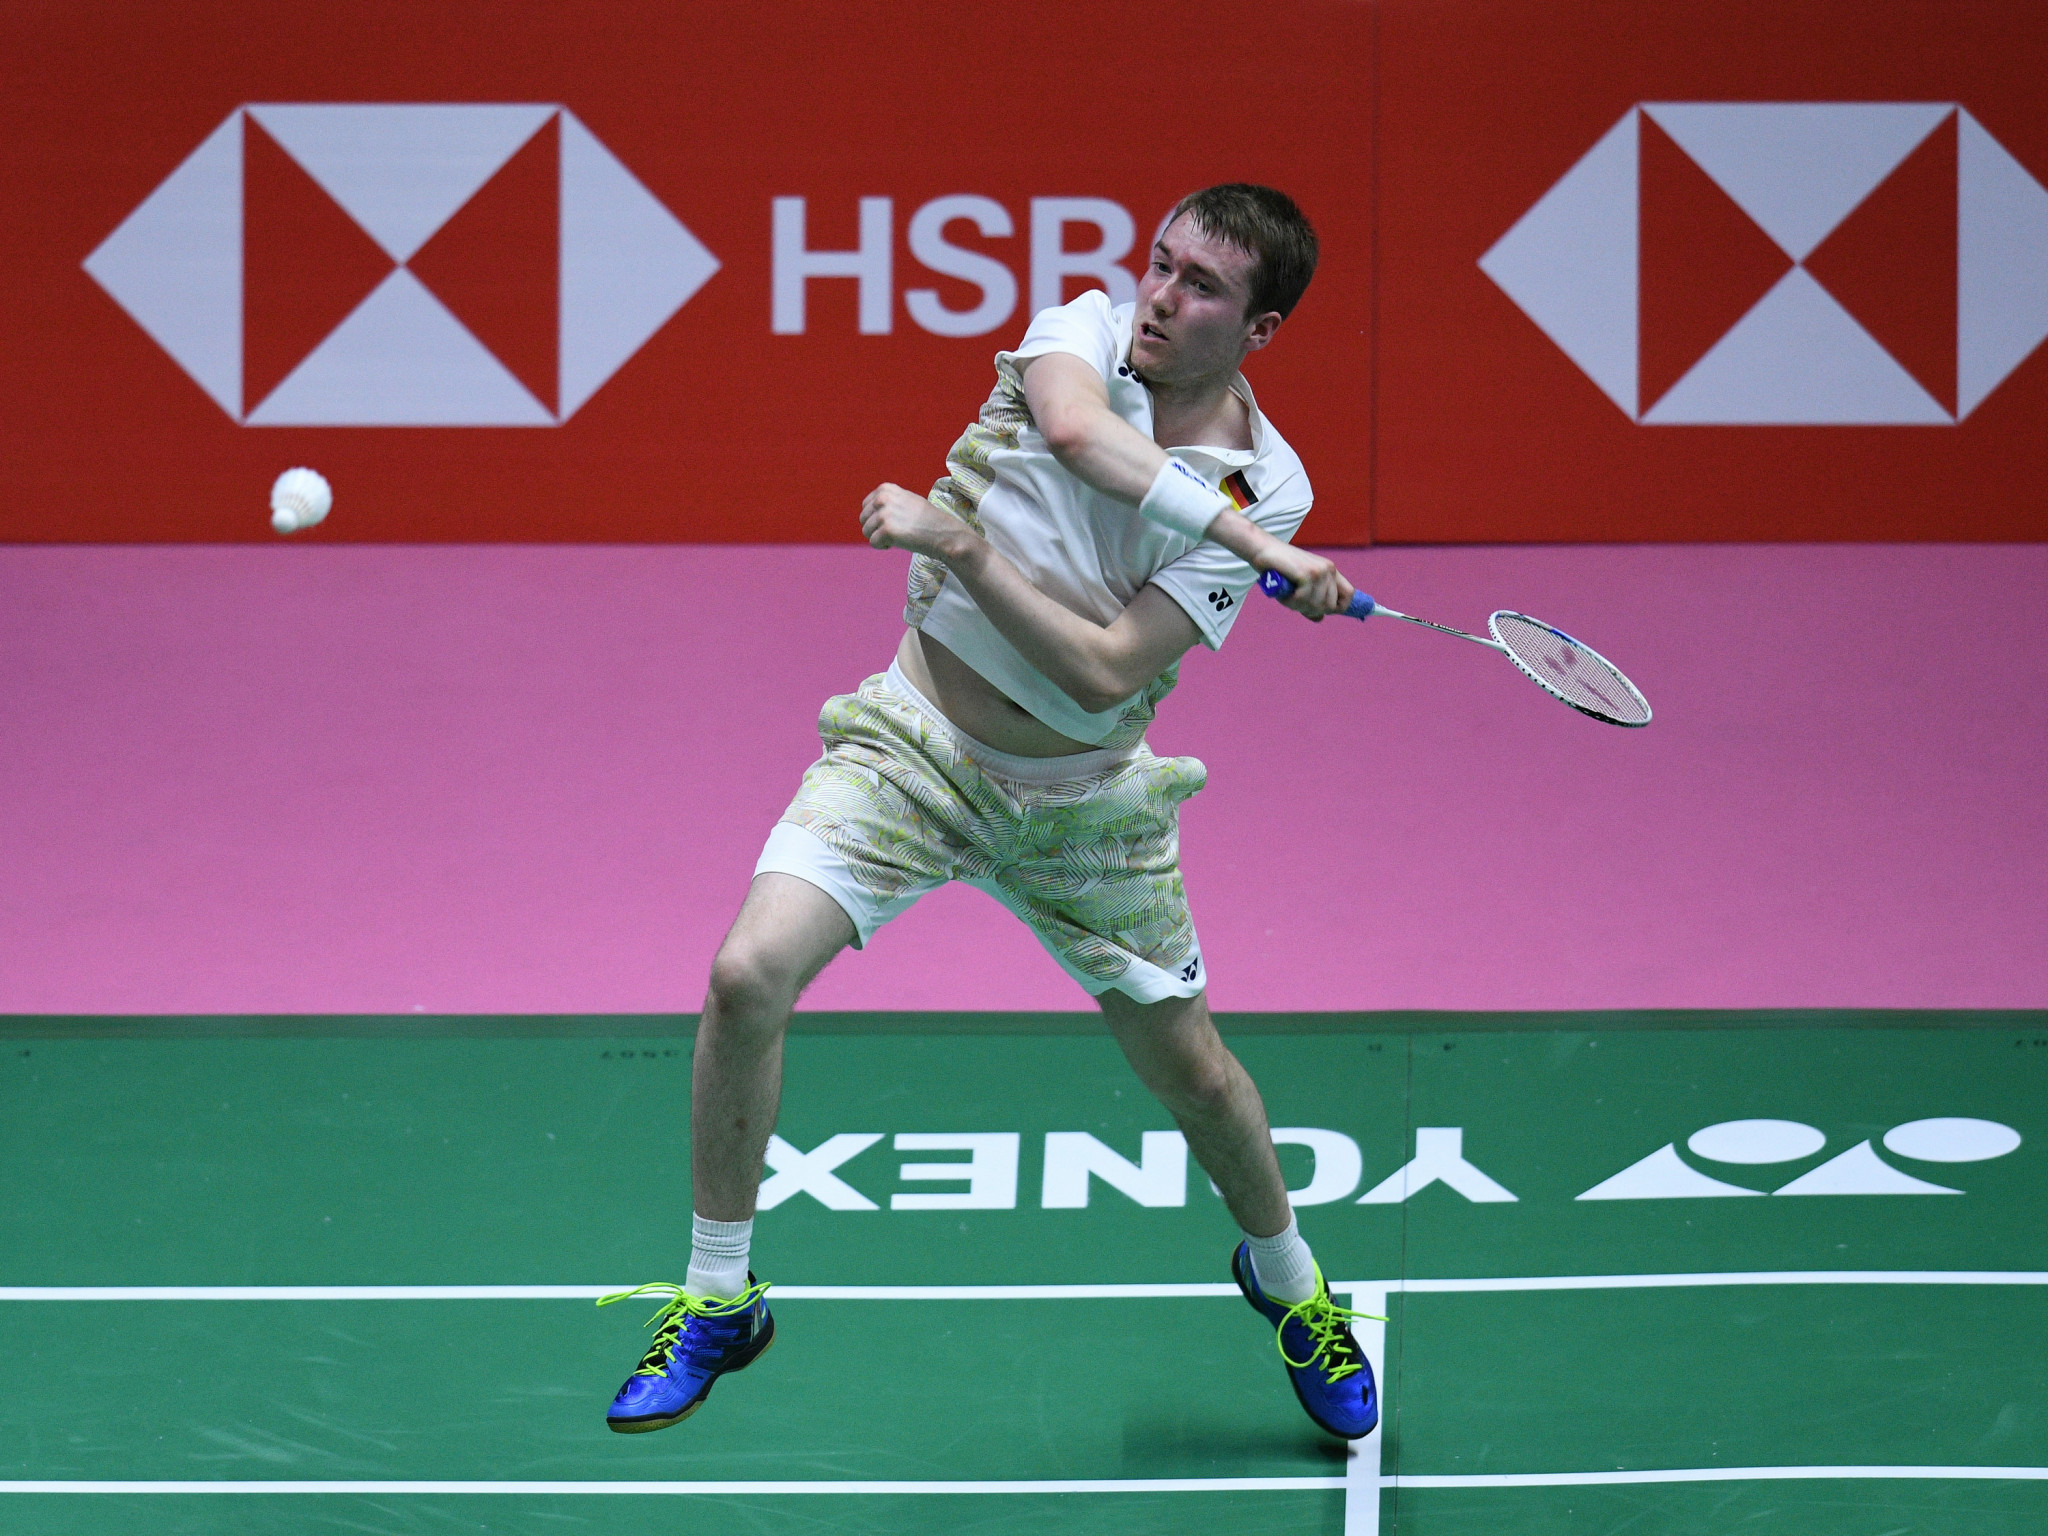 Top seed Lars Schaenzler is up and running in his quest to claim the men’s singles title at the FISU World Badminton Championships in Kuala Lumpur ©Getty Images